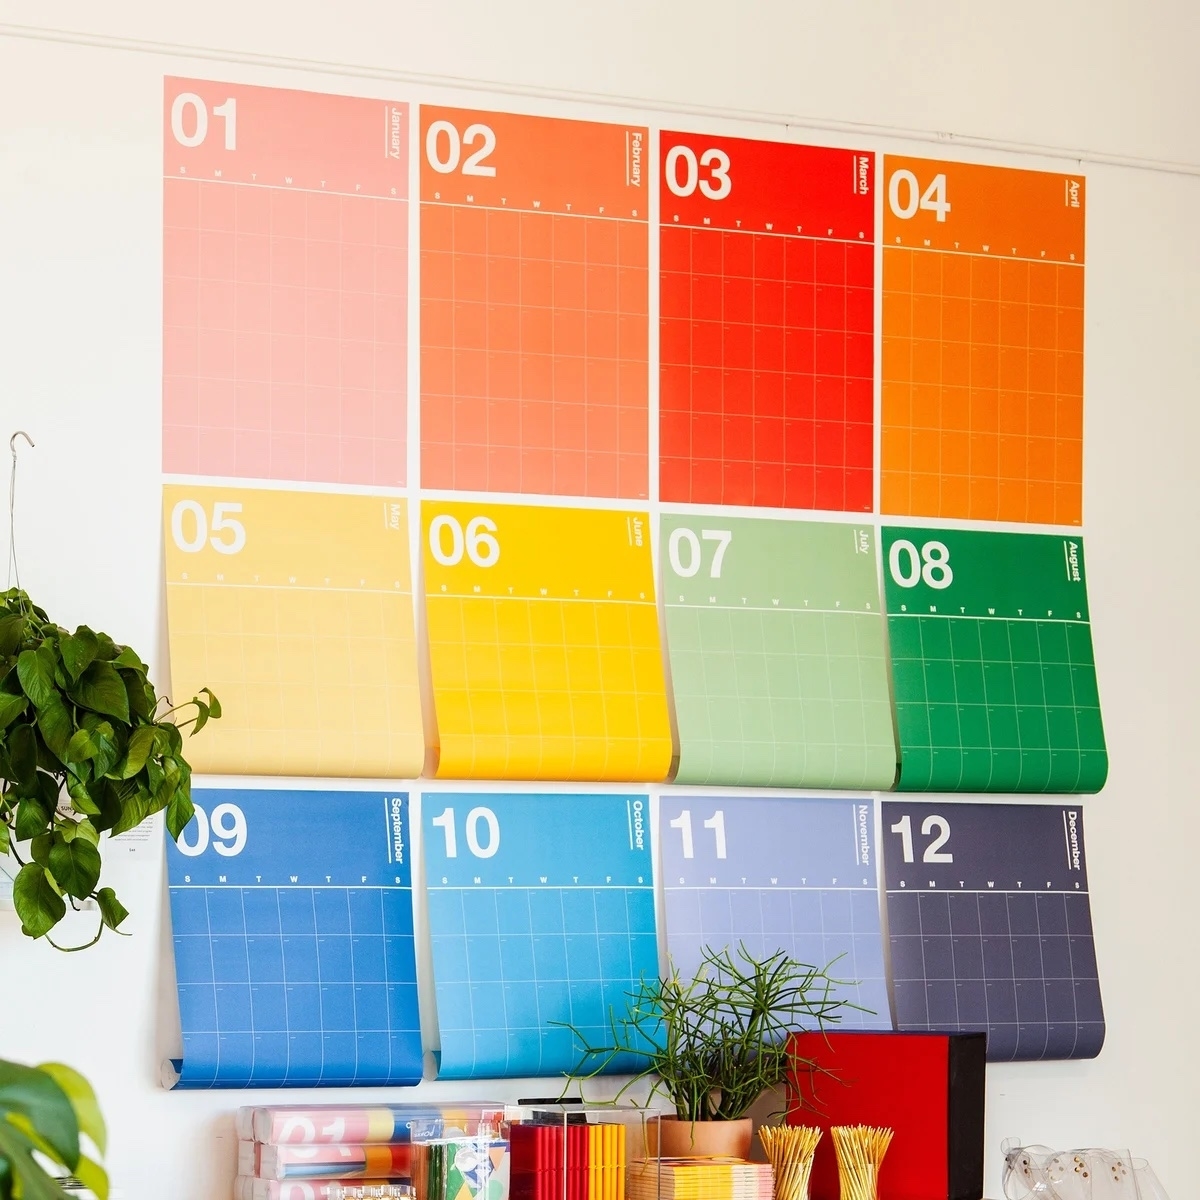 a wall planner made up of 12 solid colored month calendar posters